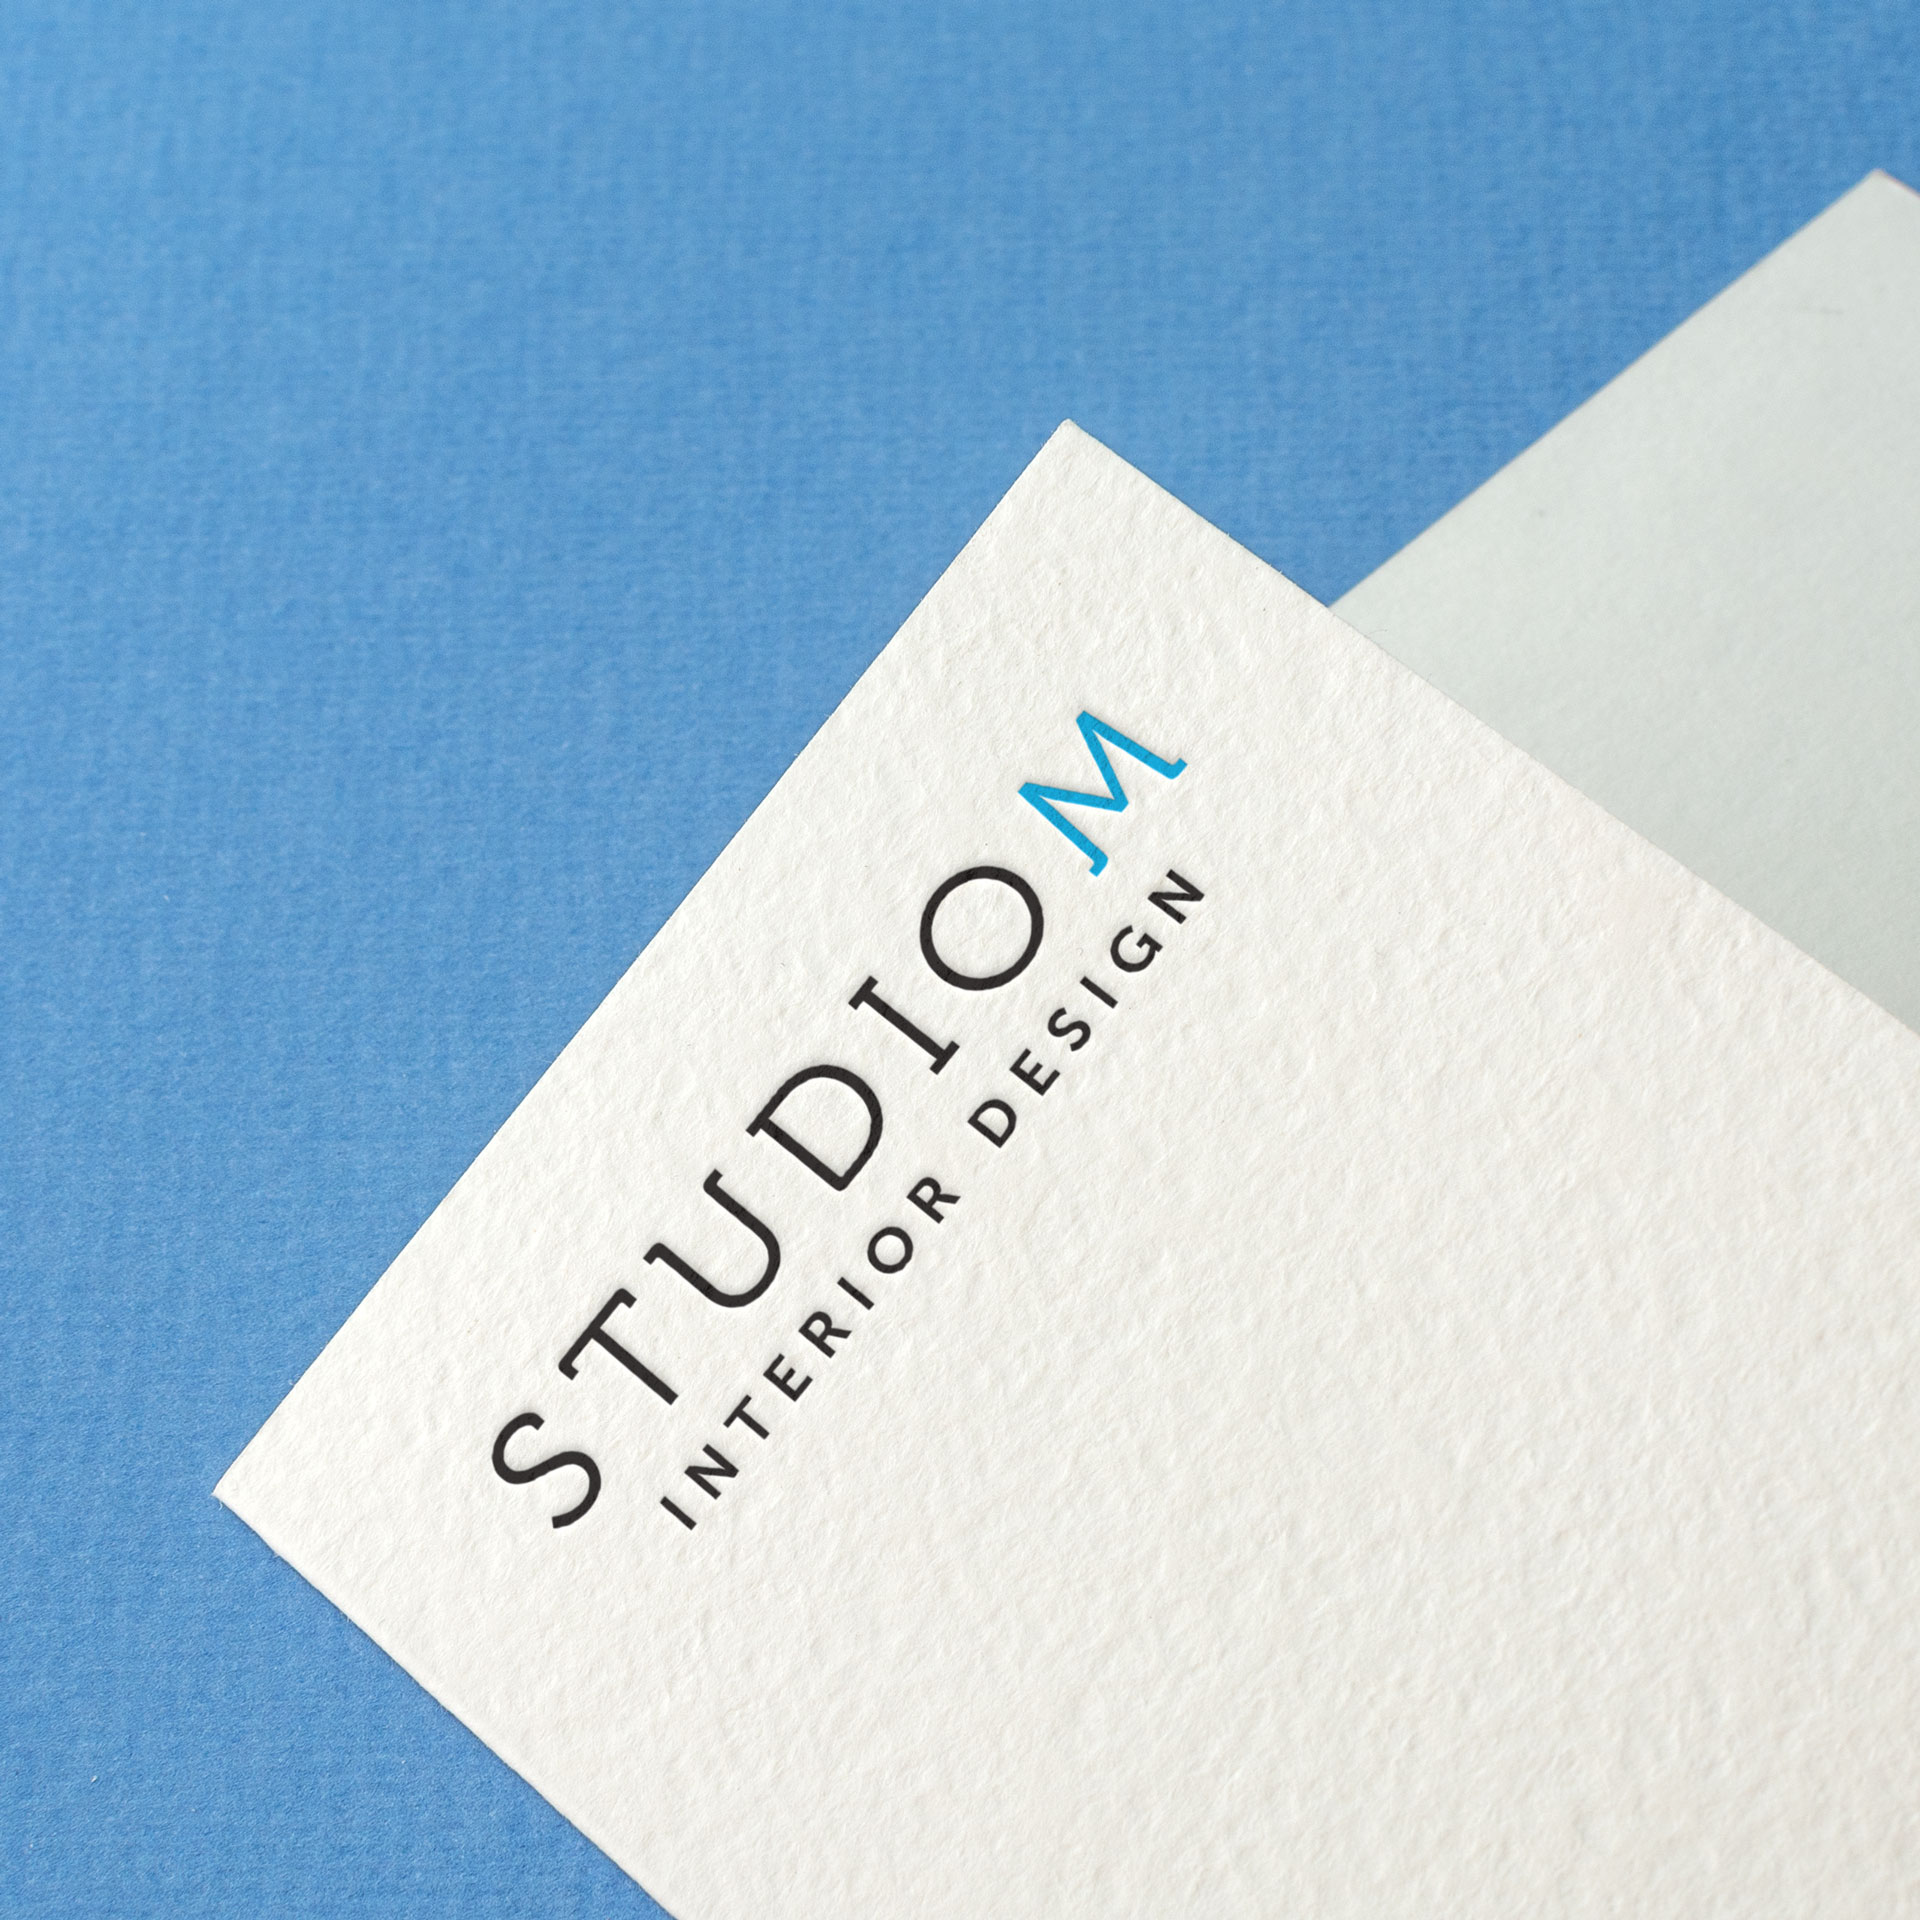 In 2013, Studio M Interior Design rebranded to update its marketing materials and better showcase its exceptional portfolio. This included a new corporate identity, website, collateral, and a focus on social media, advertising, and PR to support their new branding.